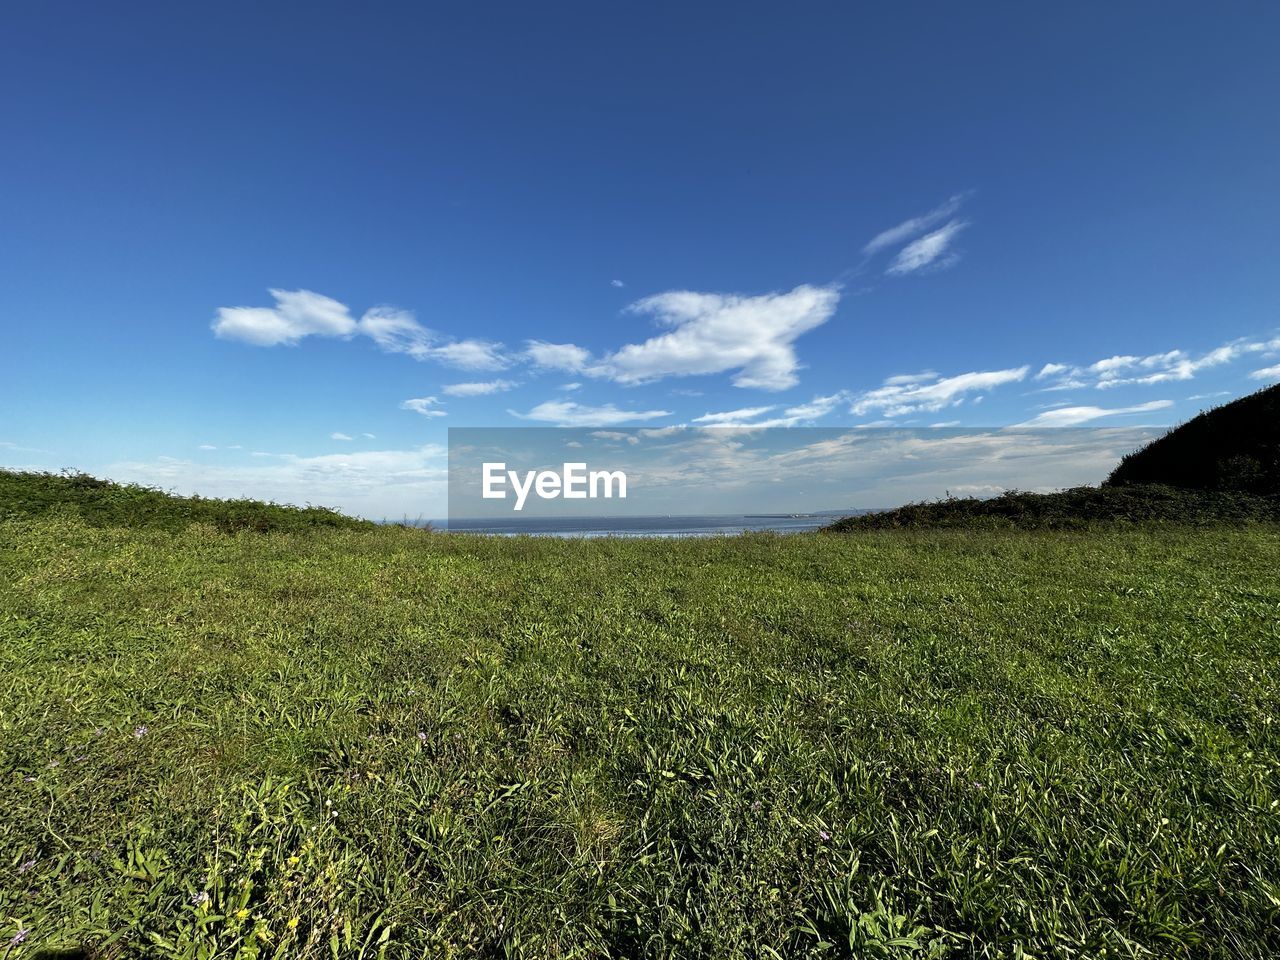 sky, horizon, landscape, environment, grass, grassland, nature, plant, hill, land, meadow, sunlight, cloud, natural environment, field, scenics - nature, beauty in nature, green, blue, plain, rural area, no people, rural scene, agriculture, tranquility, pasture, prairie, outdoors, flower, plateau, growth, tranquil scene, day, crop, tree, horizon over land, non-urban scene, summer